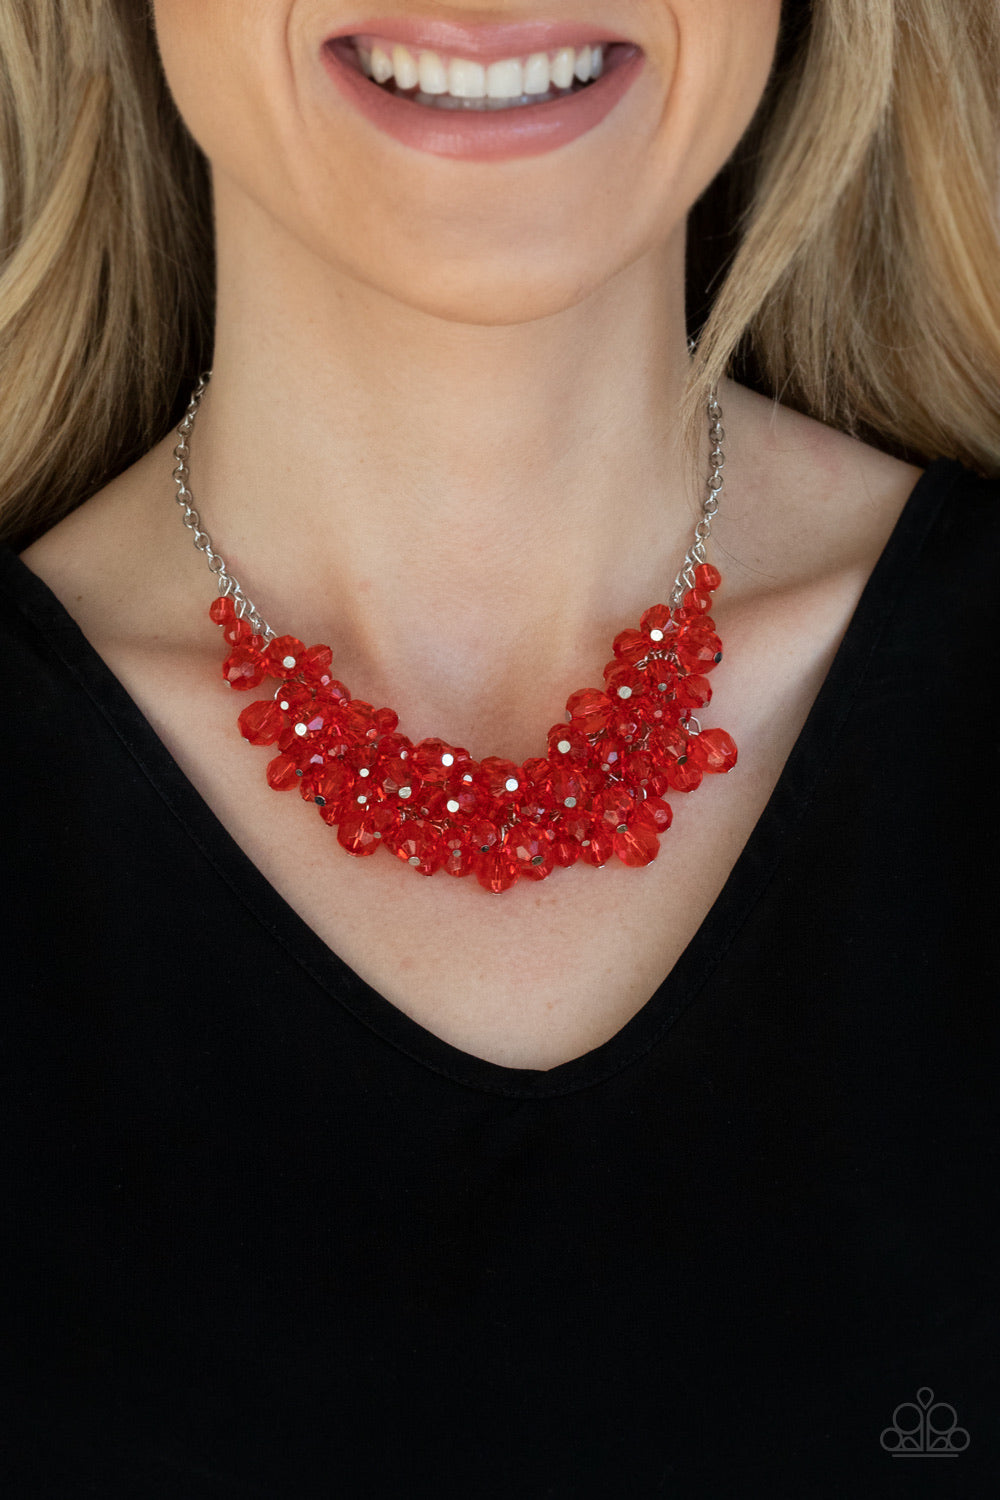 Paparazzi Jewelry Necklace Let The Festivities Begin - Red